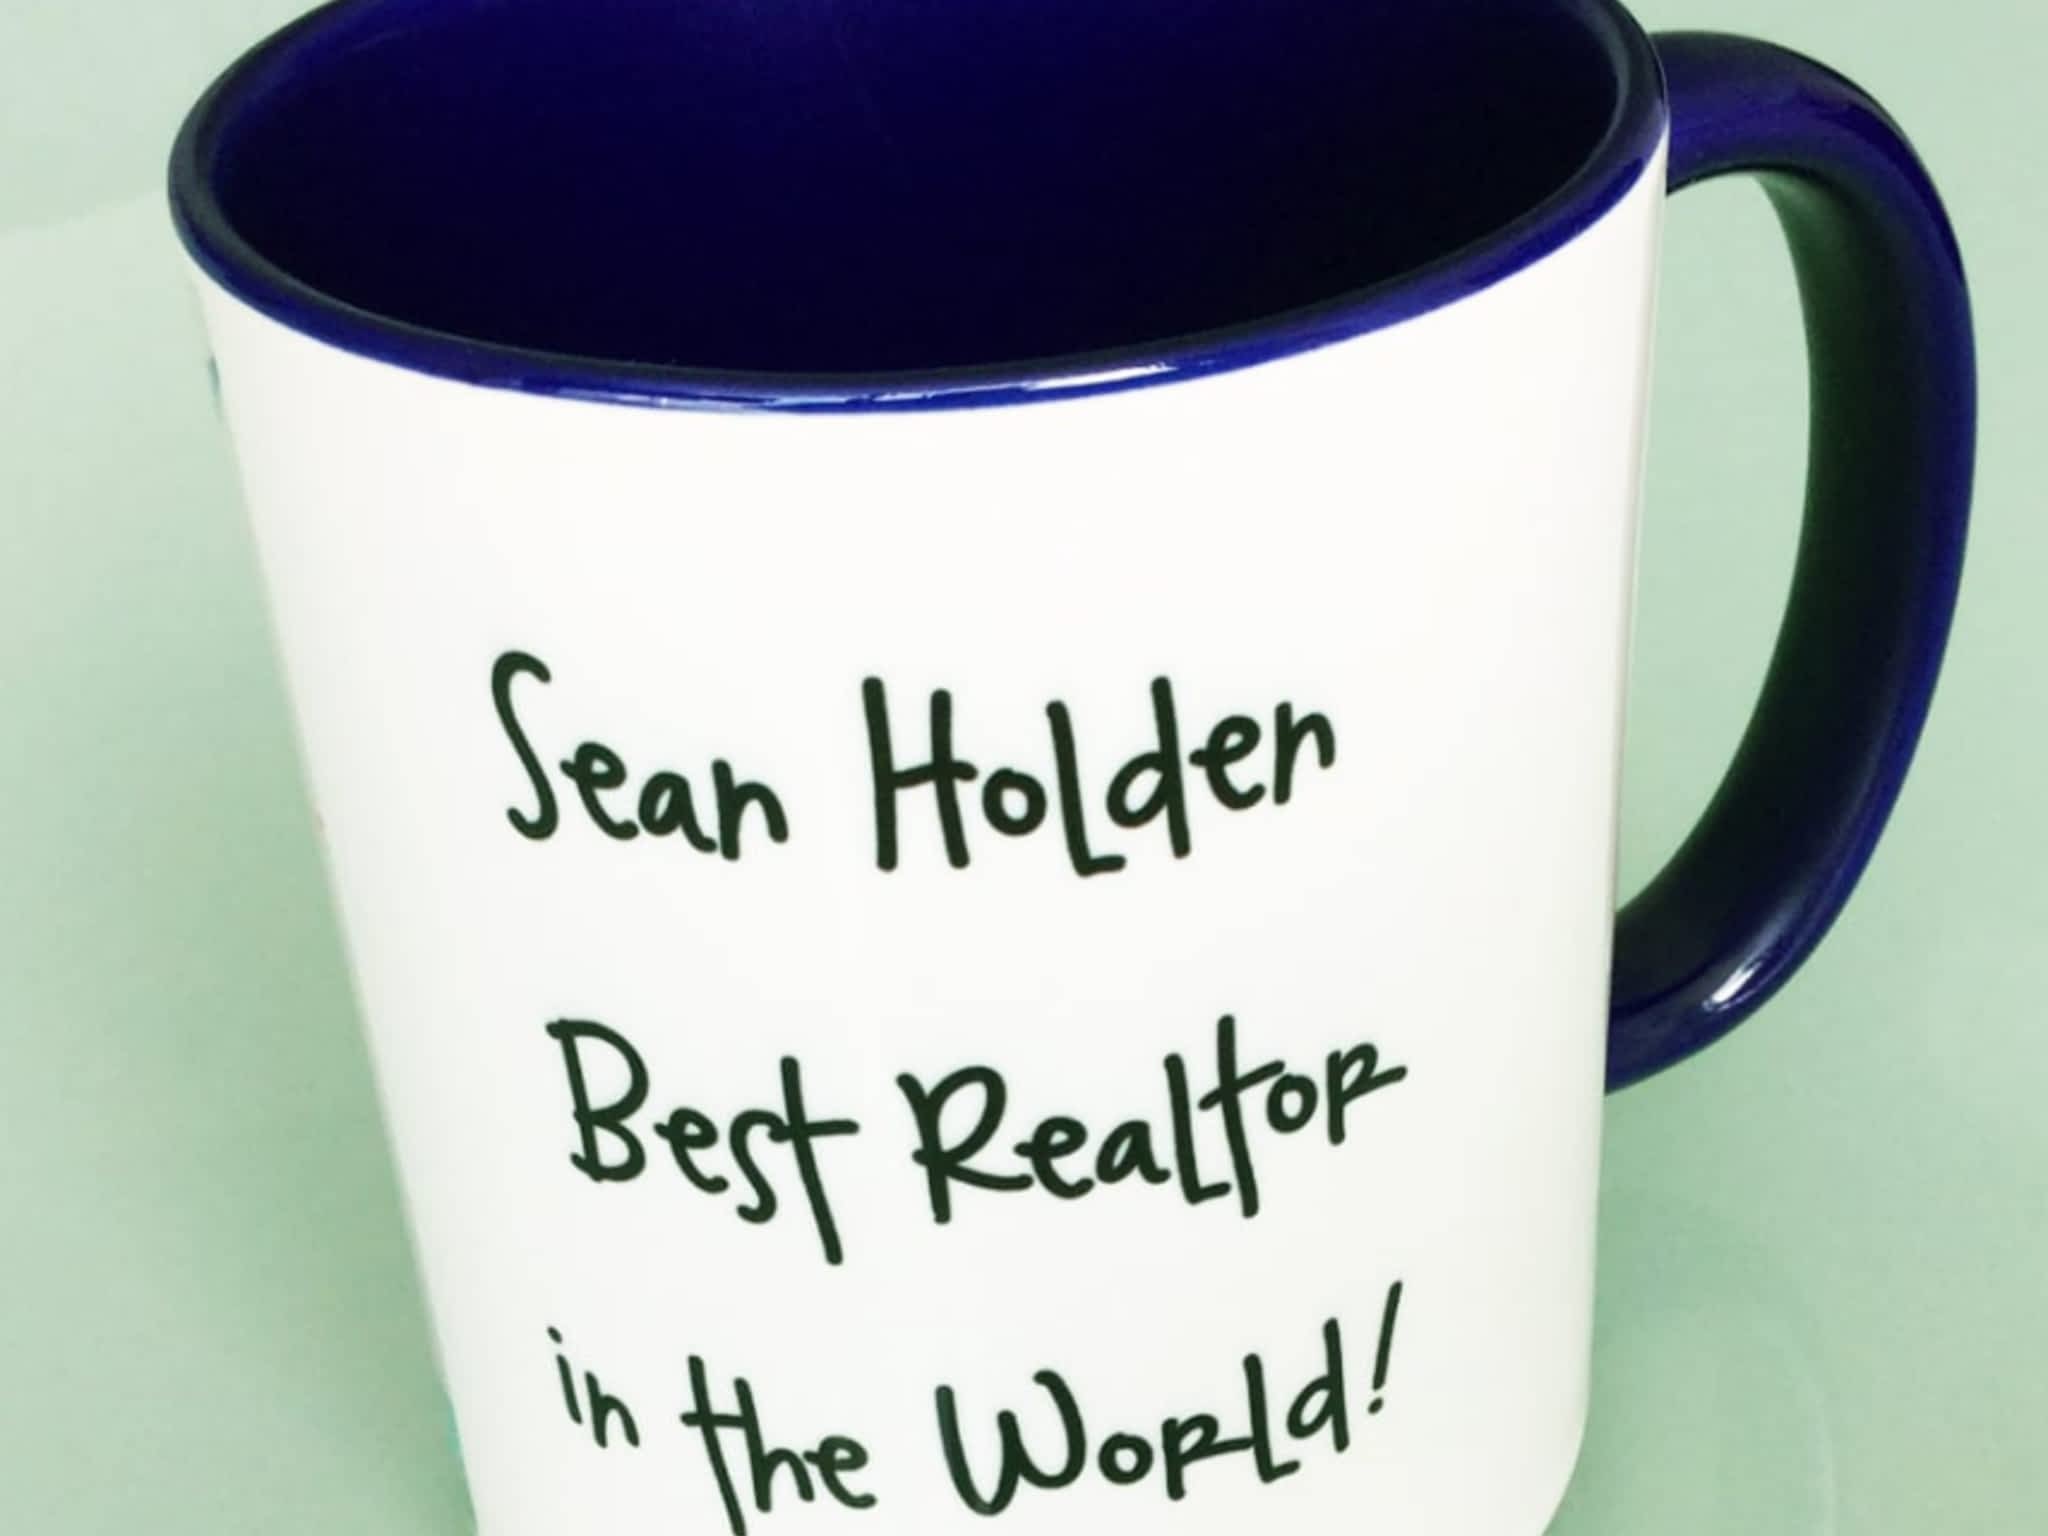 photo Sean Holden - RE/MAX Real Estate Services